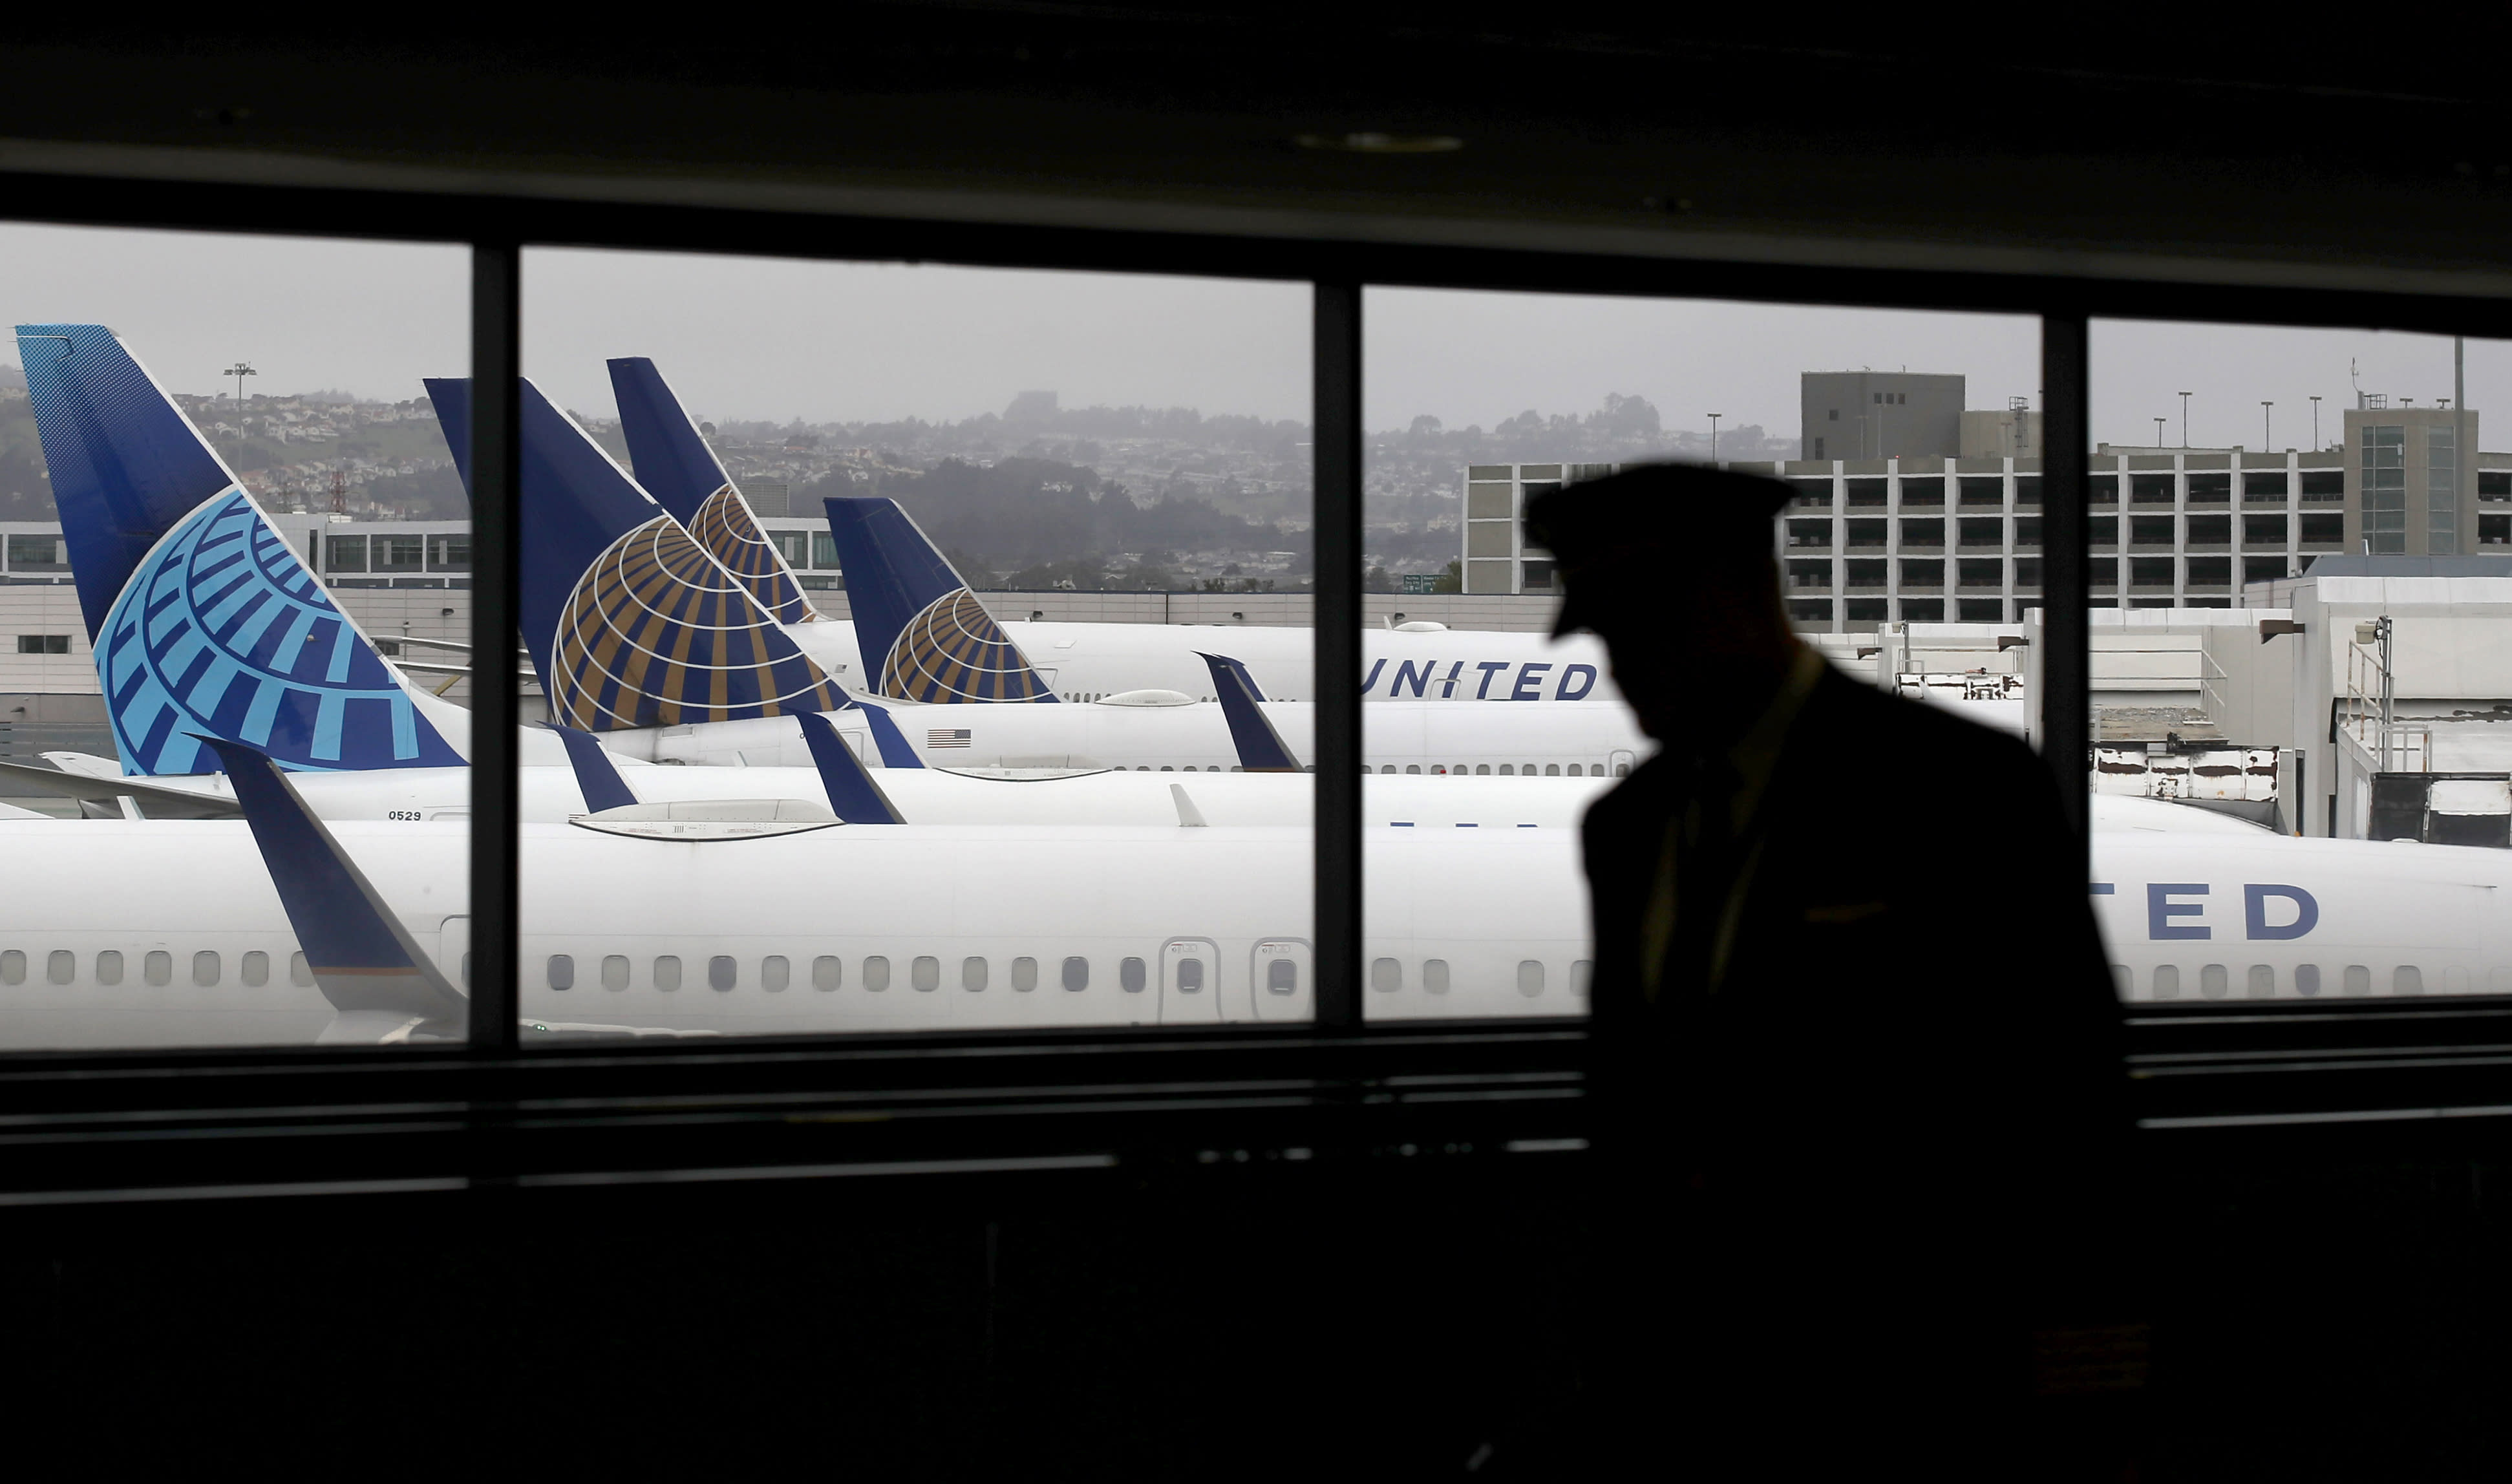 United Airlines will open the flight school, intends to increase diversity